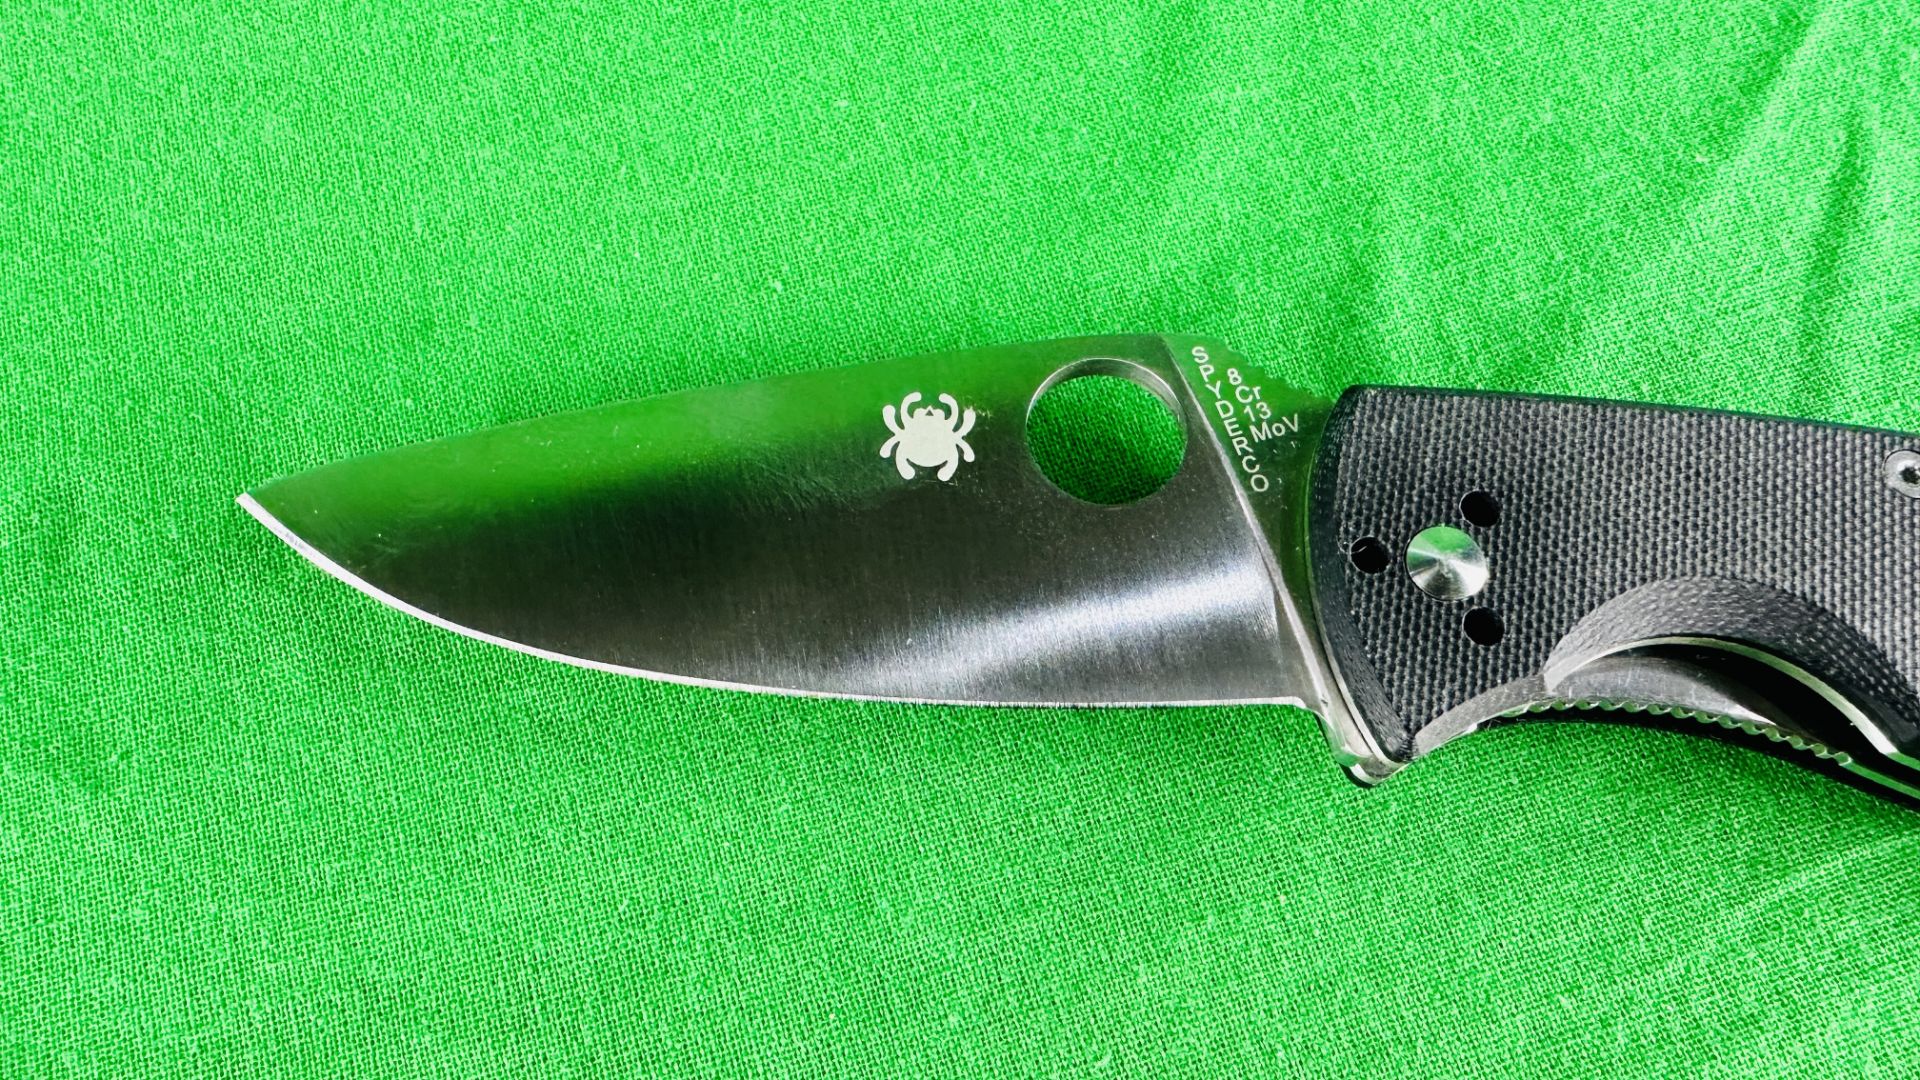 SPYDERCO TENACIOUS C122GP FOLDING POCKET LOCK KNIFE - NO POSTAGE OR PACKING AVAILABLE - Image 2 of 6